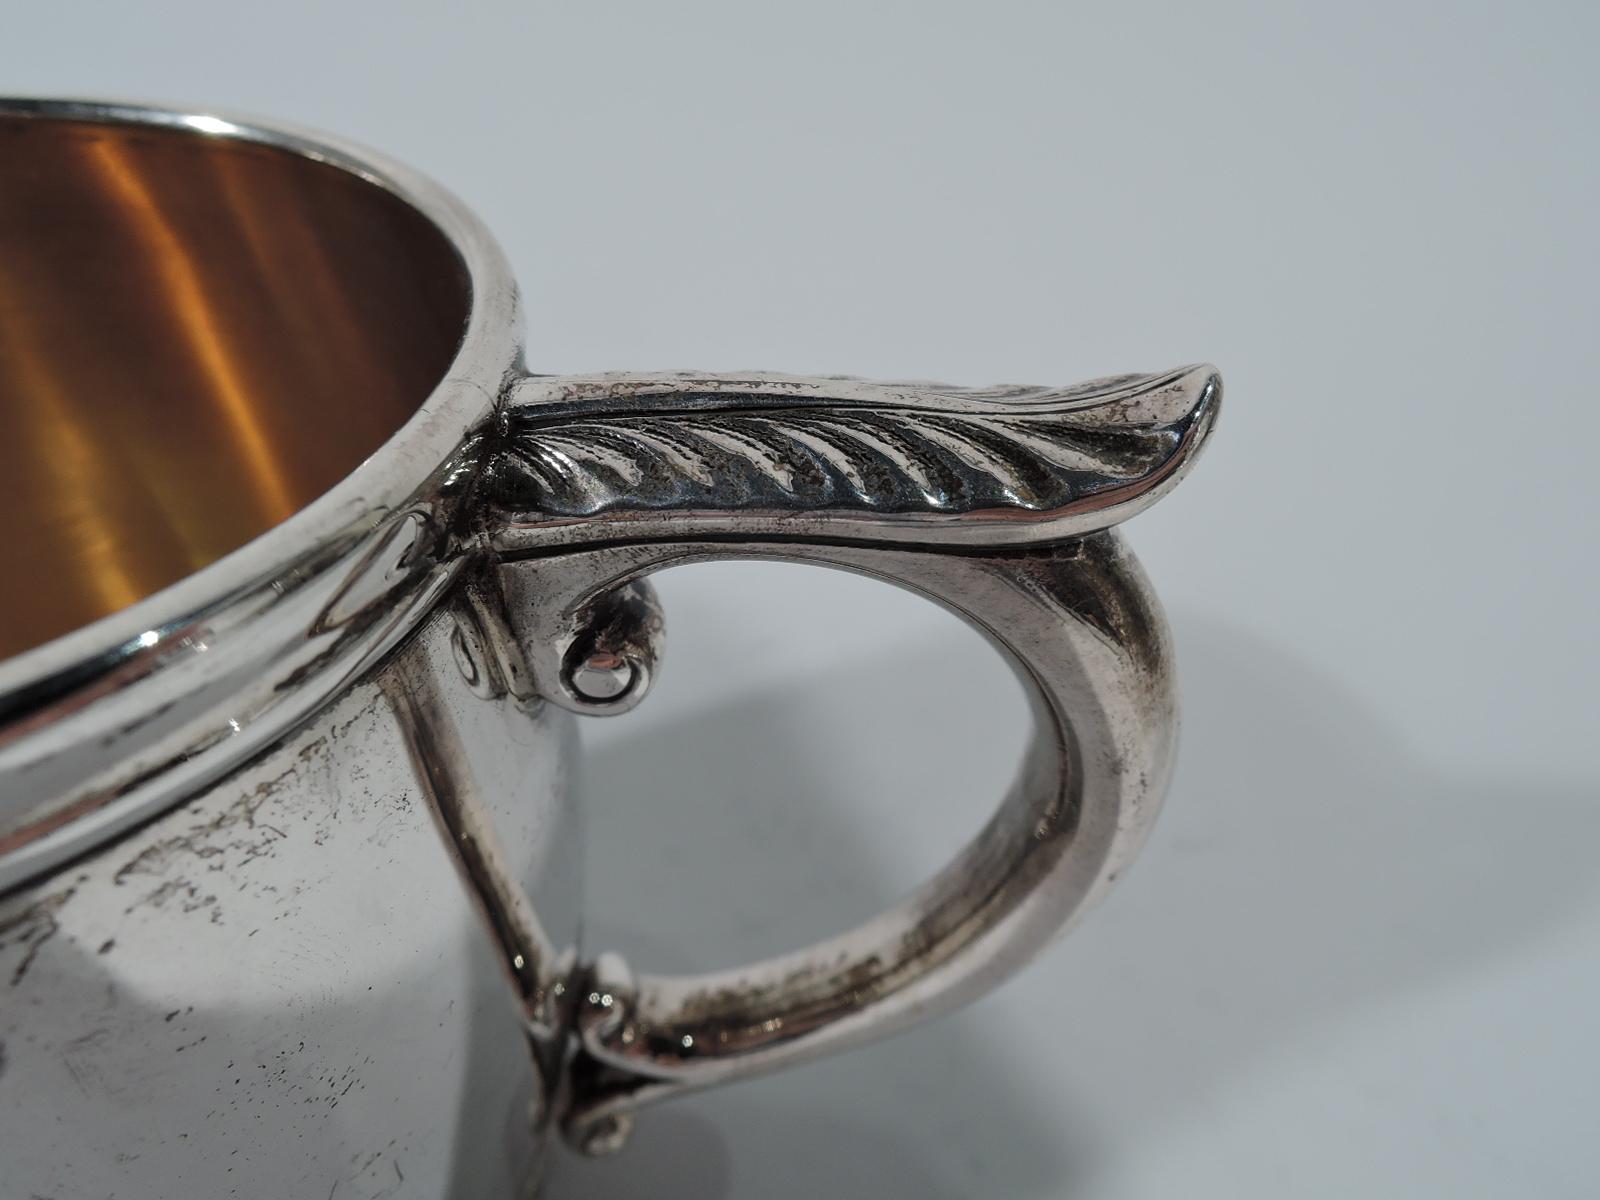 Sterling silver christening mug. Made by Durgin (later part of Gorham) in Concord, New Hampshire, circa 1900. Barrel form with molded rim and leaf-capped scrolled handle. At base tooled Classical ornament with alternating scallop shells and